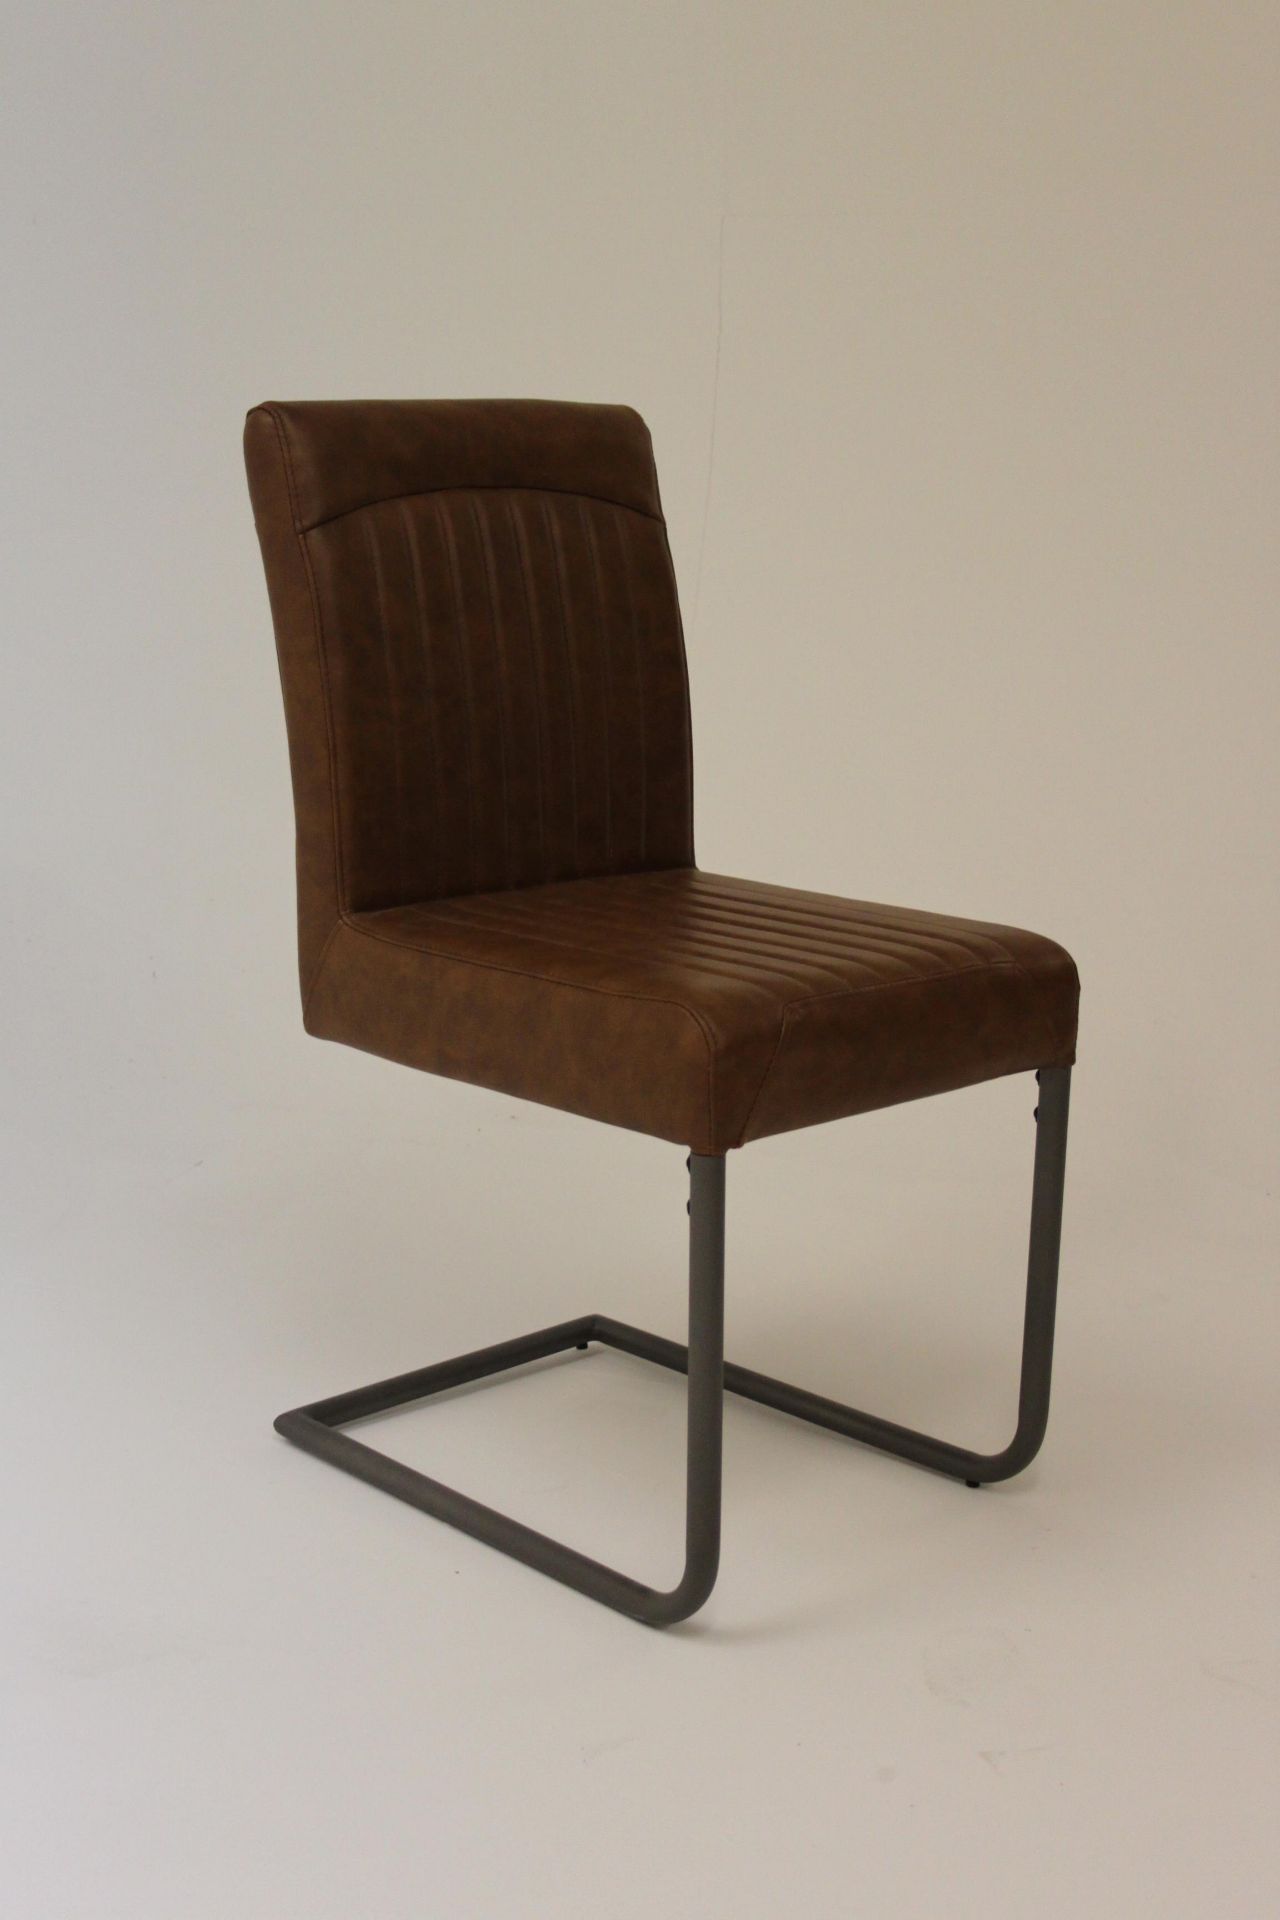 Capri Chair Tan Deep Padding With A Shapely Backrest Makes It Really Comfortable 43 5 X 57 X 91cm ( - Image 3 of 3